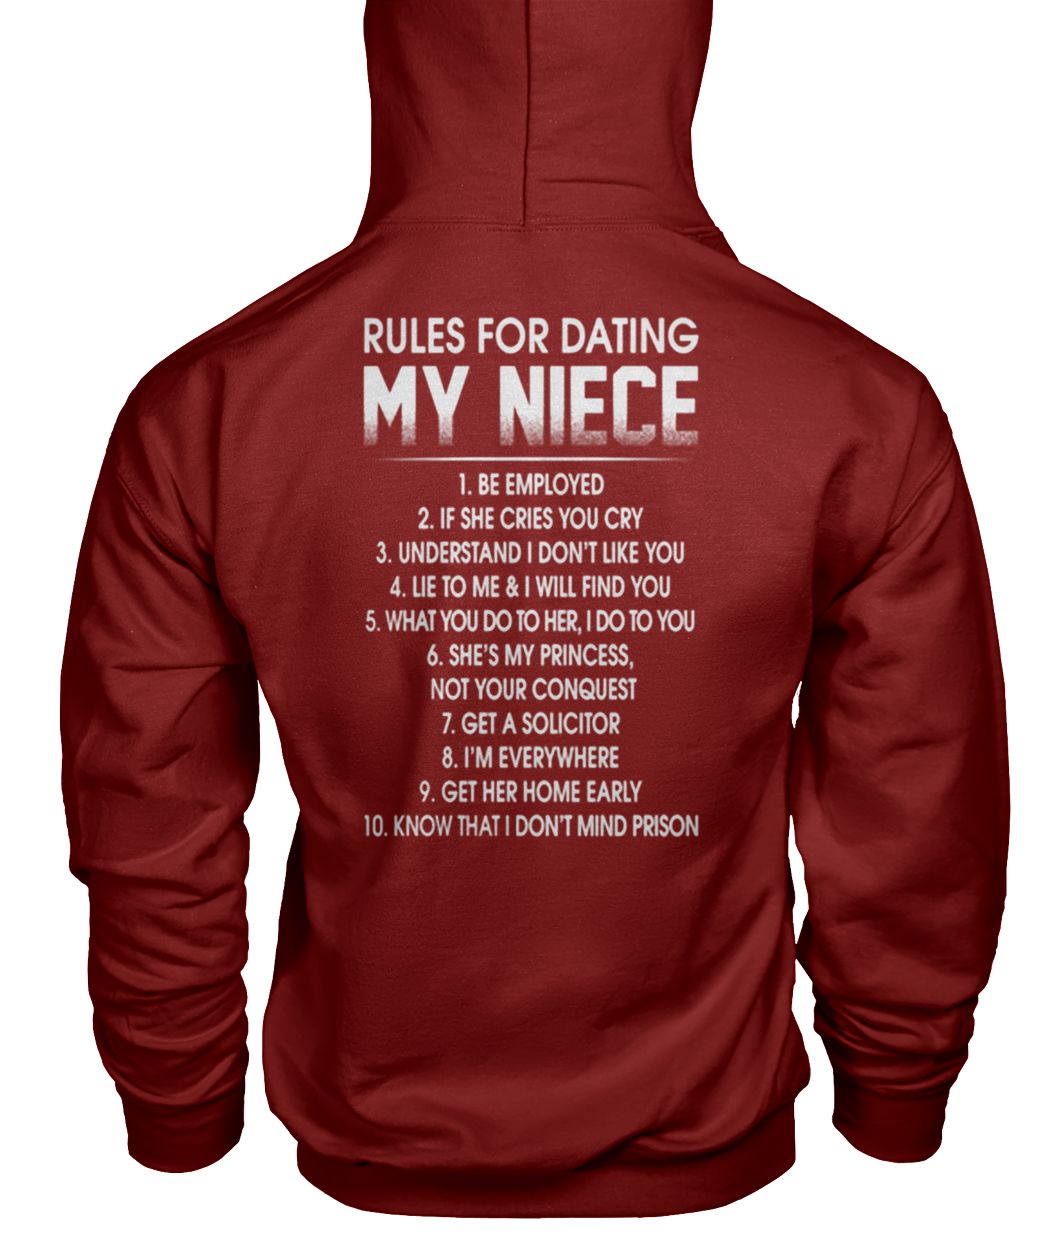 Rules for dating my niece 1 be employed 2 if she cries you cry gildan hoodie